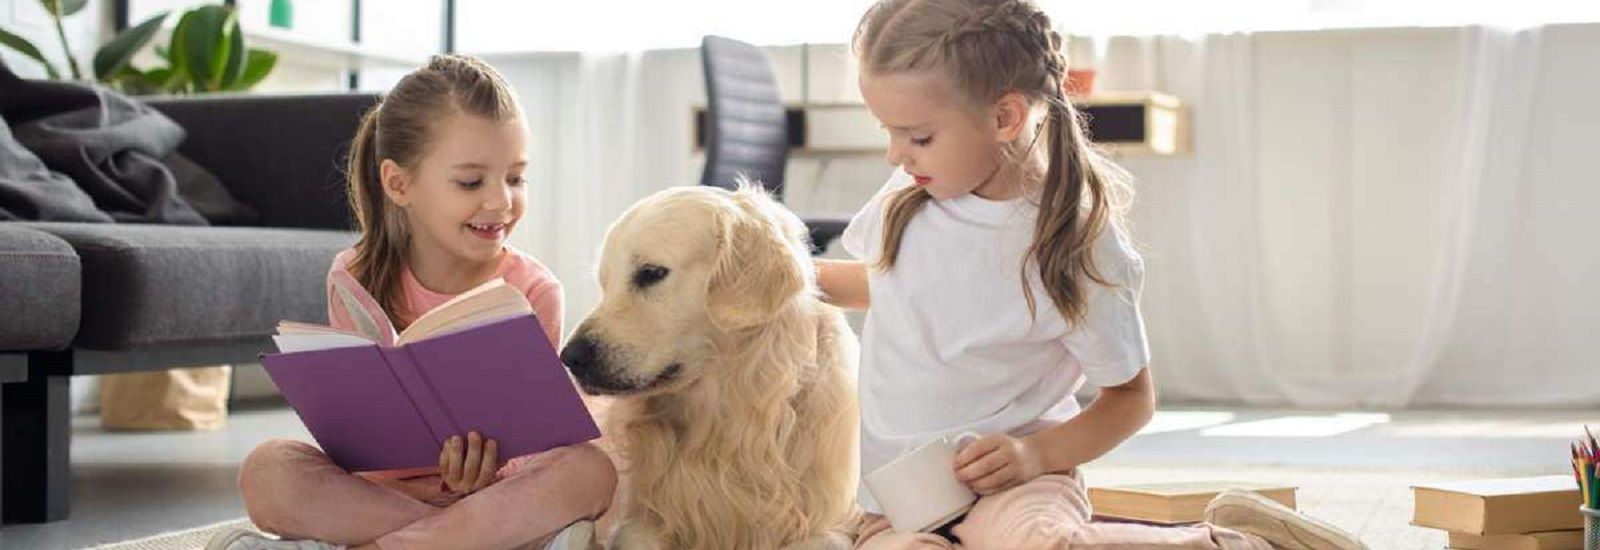 Two young girls reading a book to a therapy dog banner image